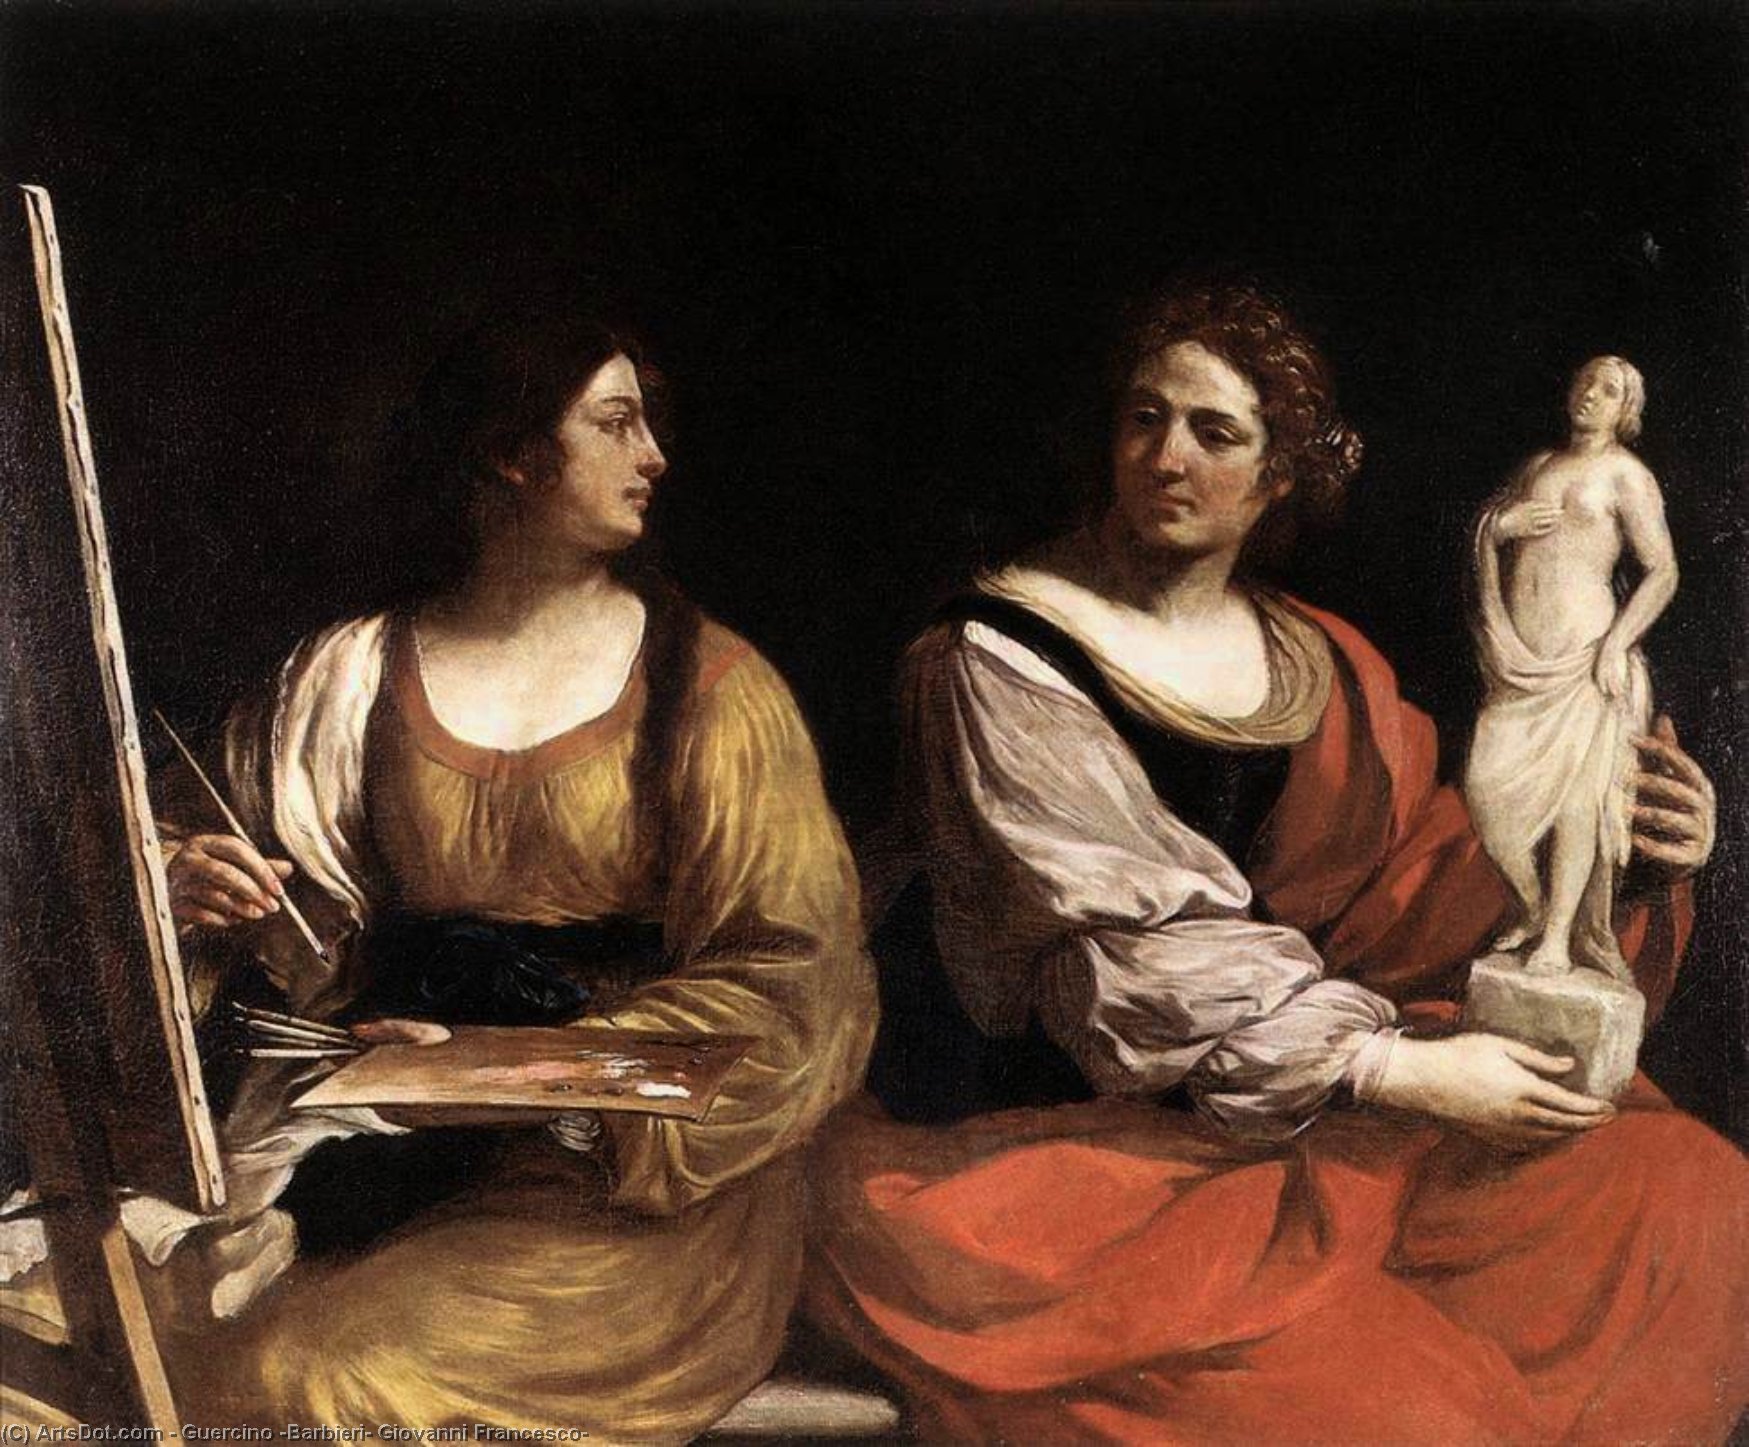 Buy Museum Art Reproductions Allegory of Painting and Sculpture by Guercino (Barbieri, Giovanni Francesco) (1591-1666, Italy) | ArtsDot.com